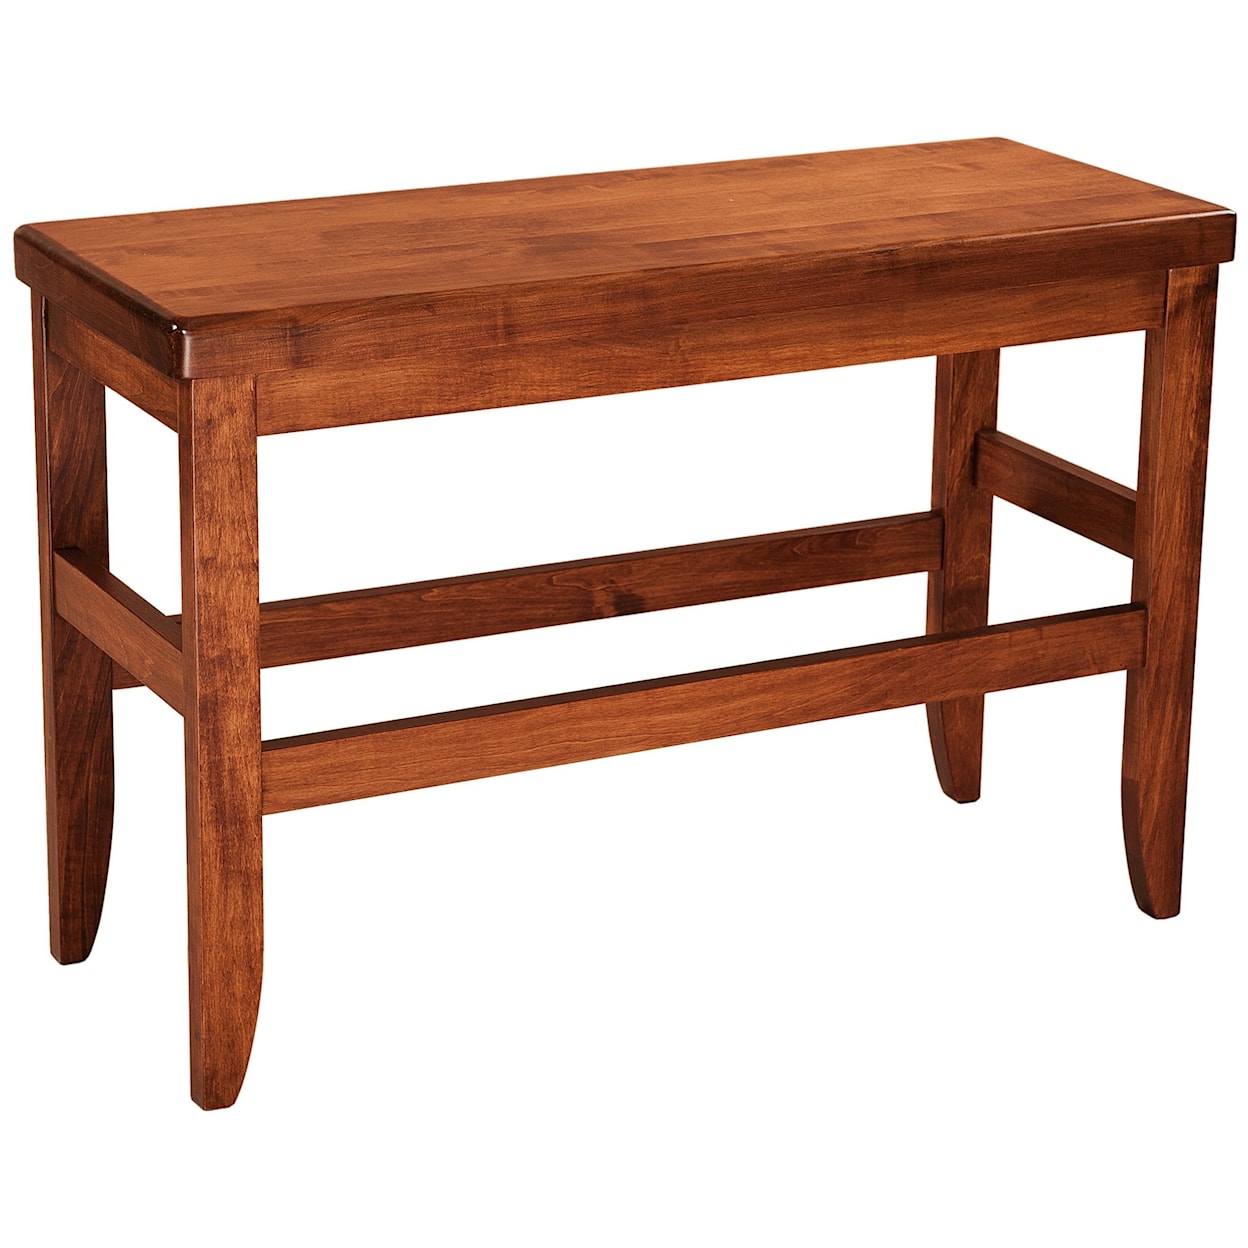 F&N Woodworking Clifton Bench 30"h x 60"w - Wood Seat